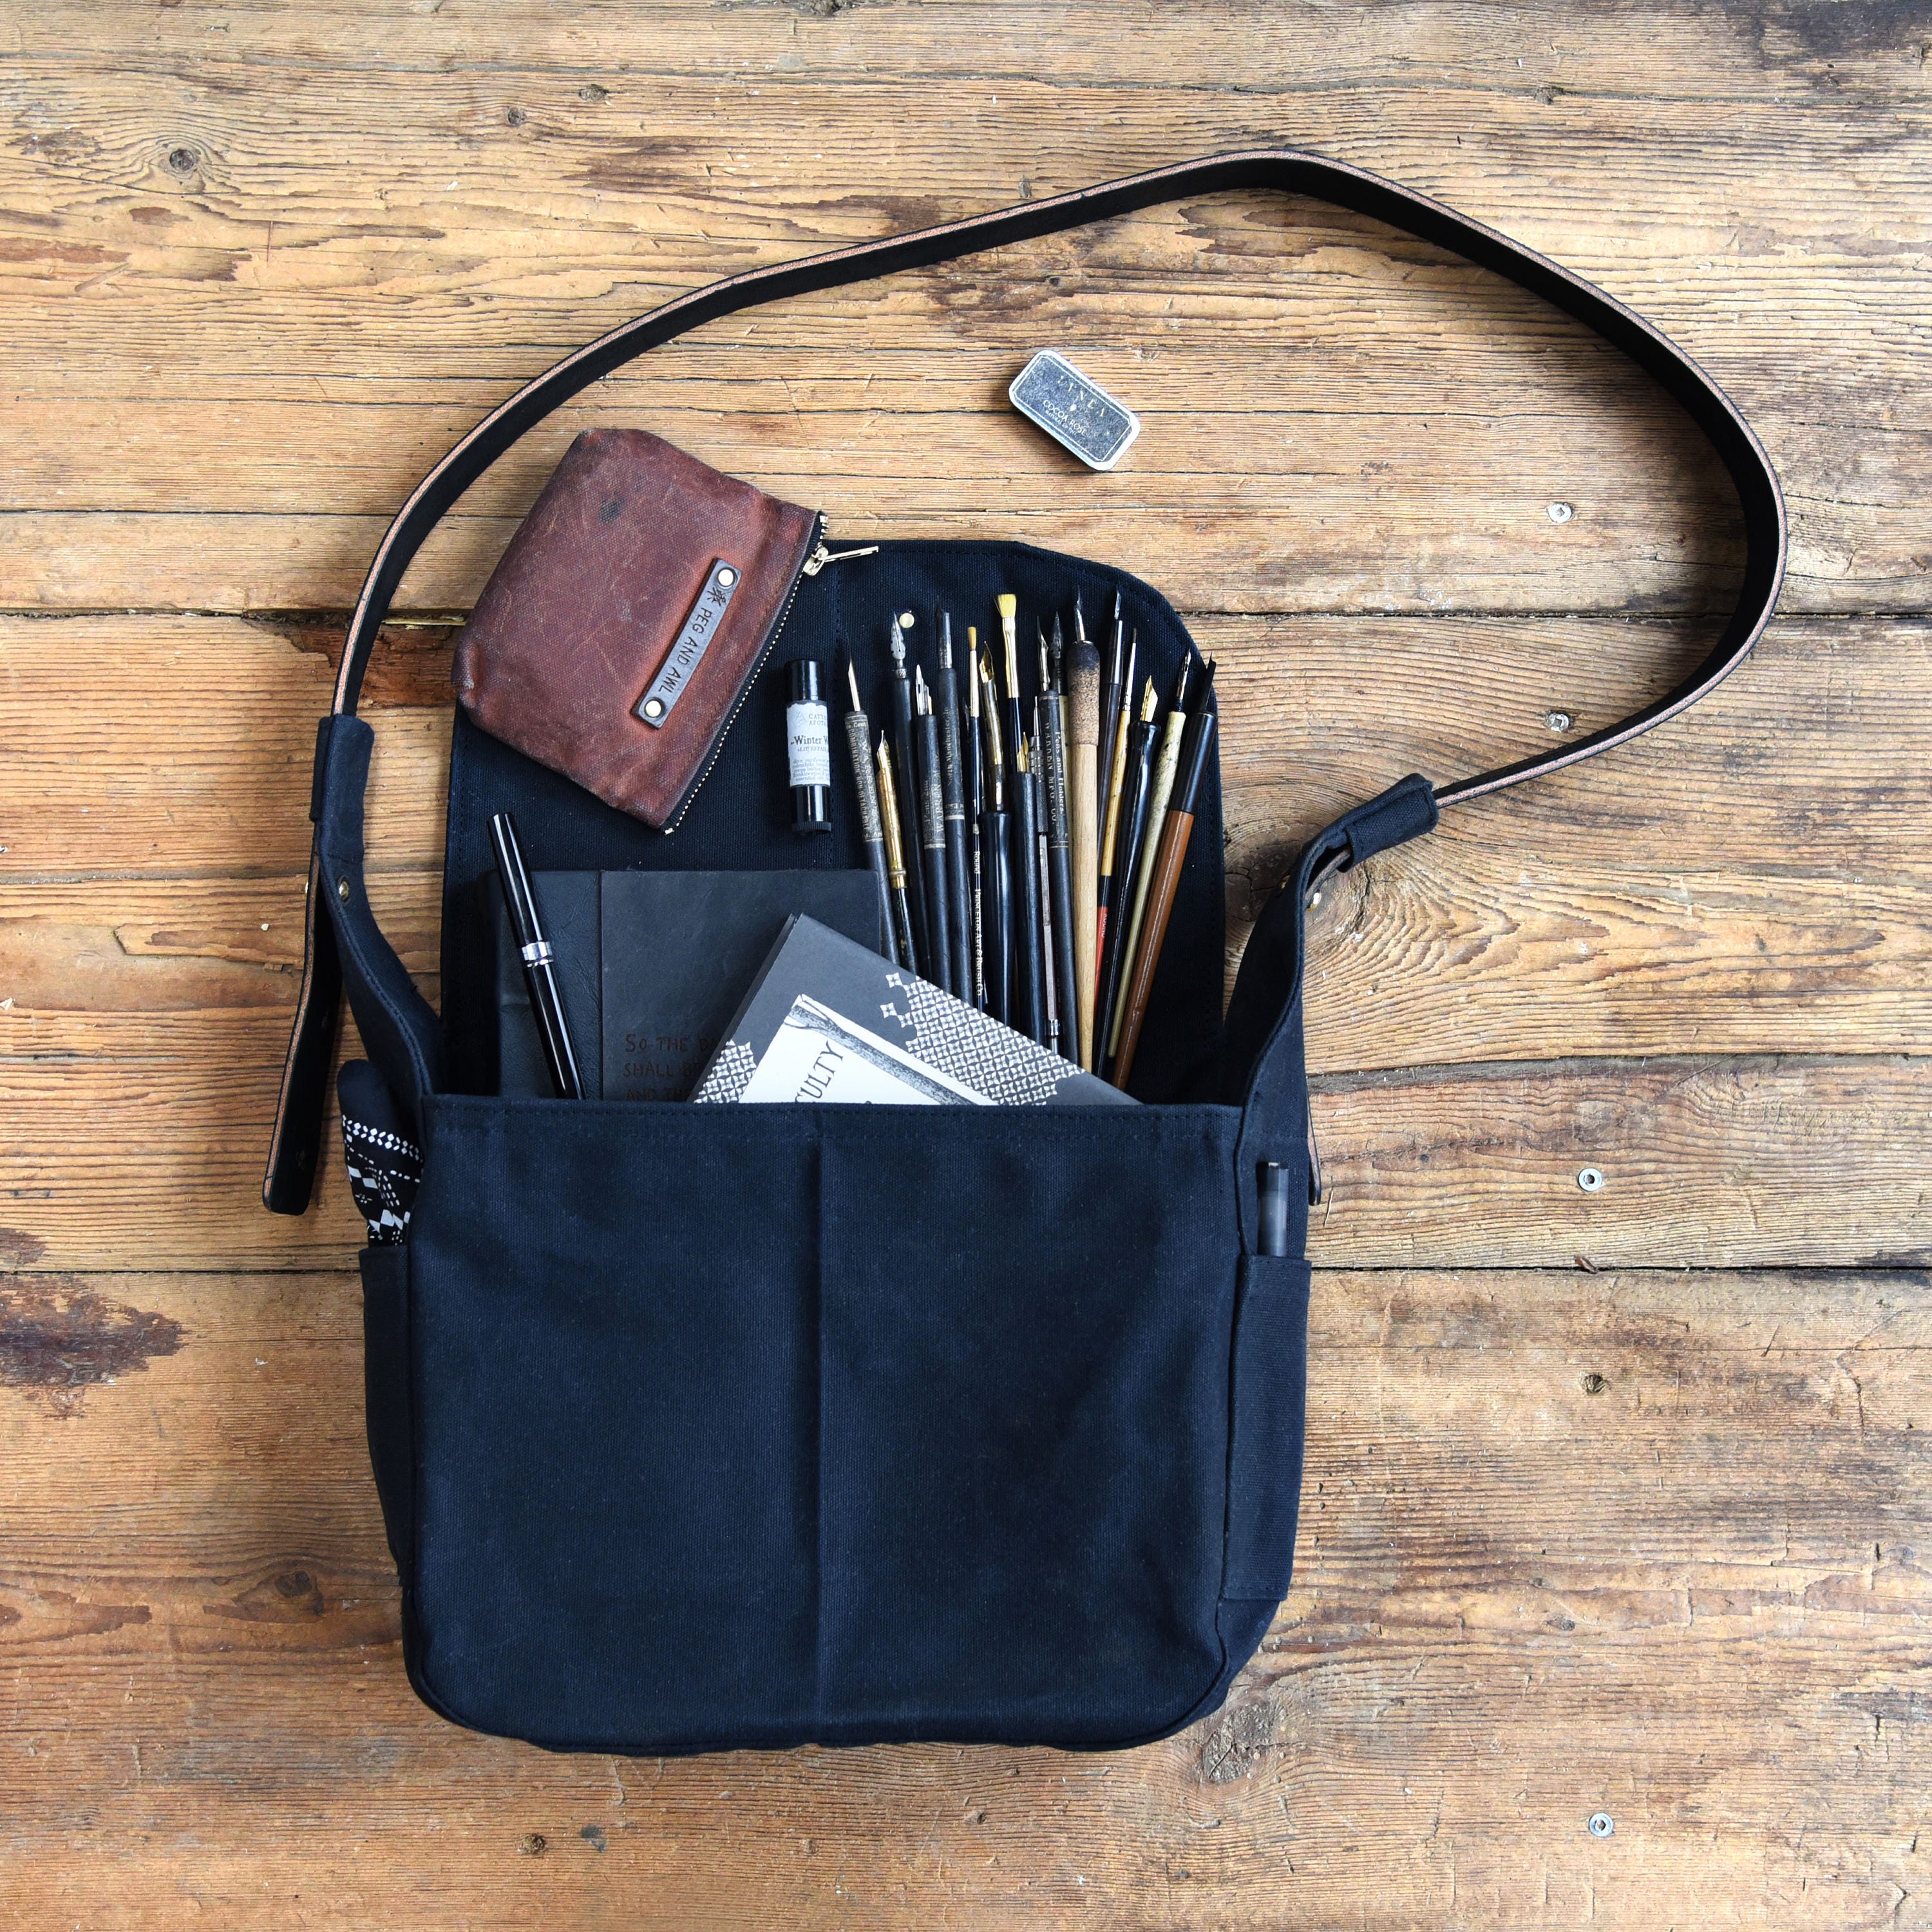 Waxed Canvas Messenger Bag With Leather Strap Black Crossbody - Etsy UK